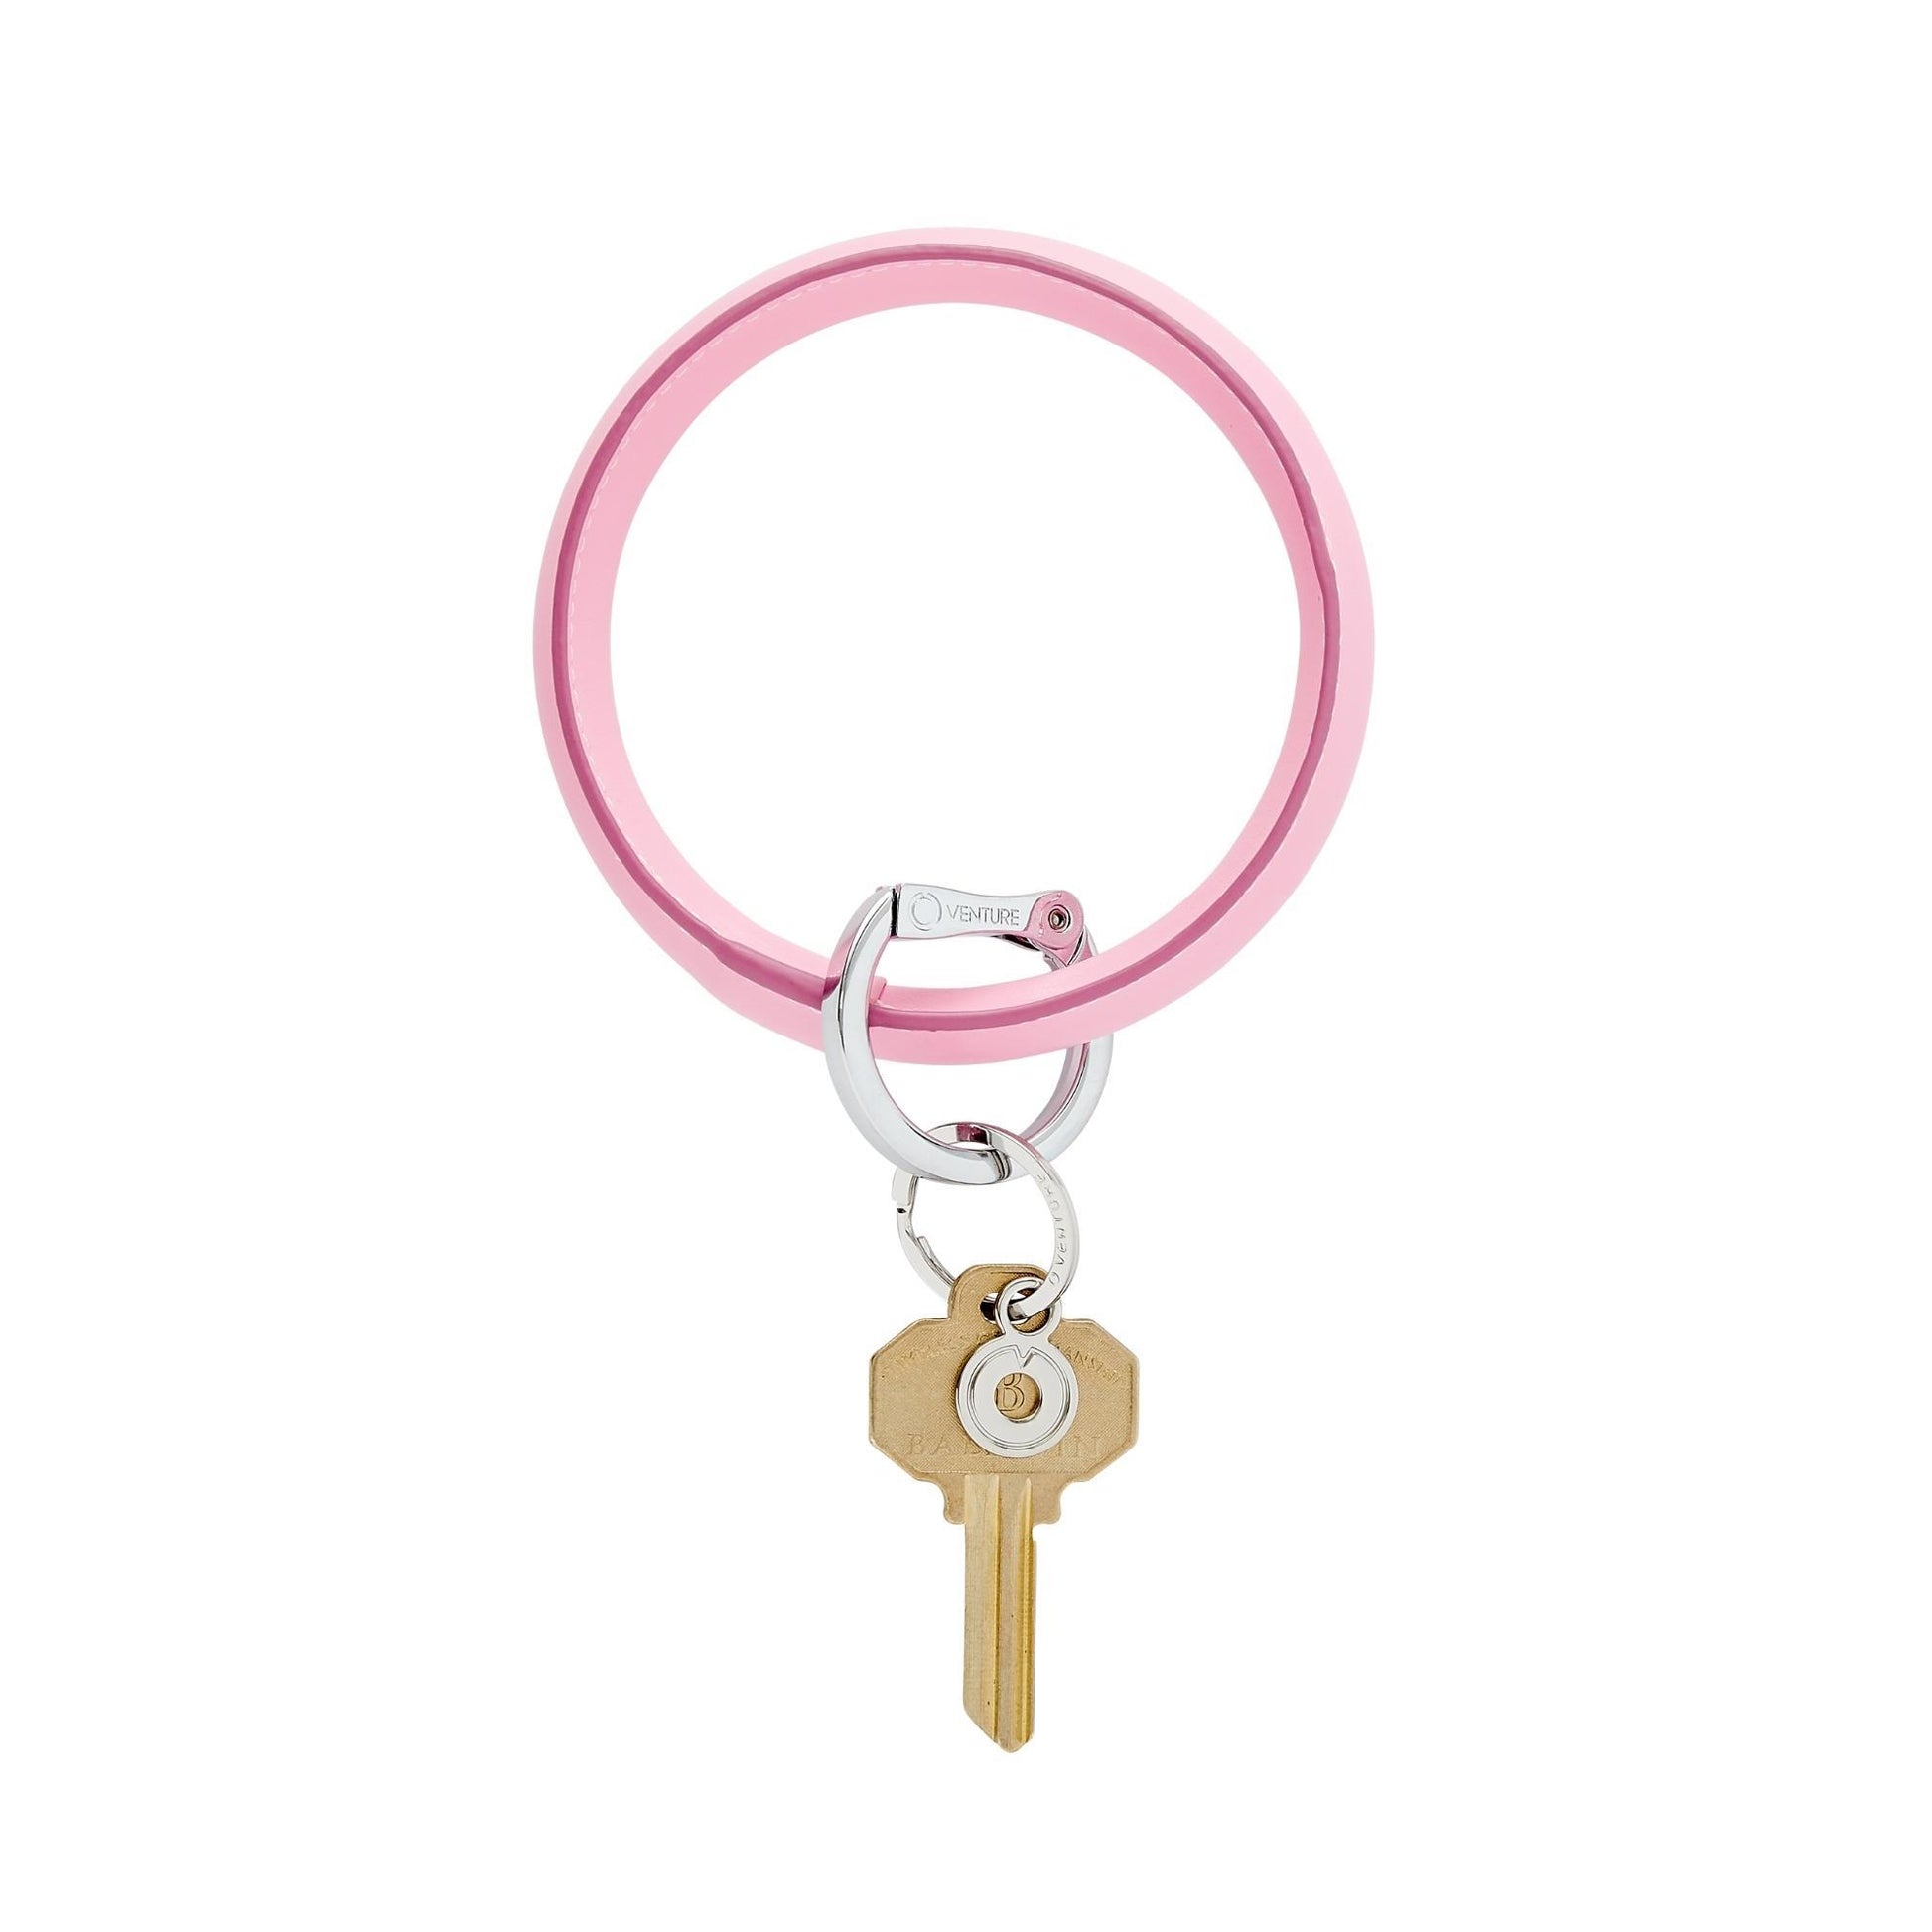 Big O Key Ring in Light pink leather with a darker pink trim.  Color is called Cotton Candy.  Oventure Silver locking clasp with key attached.